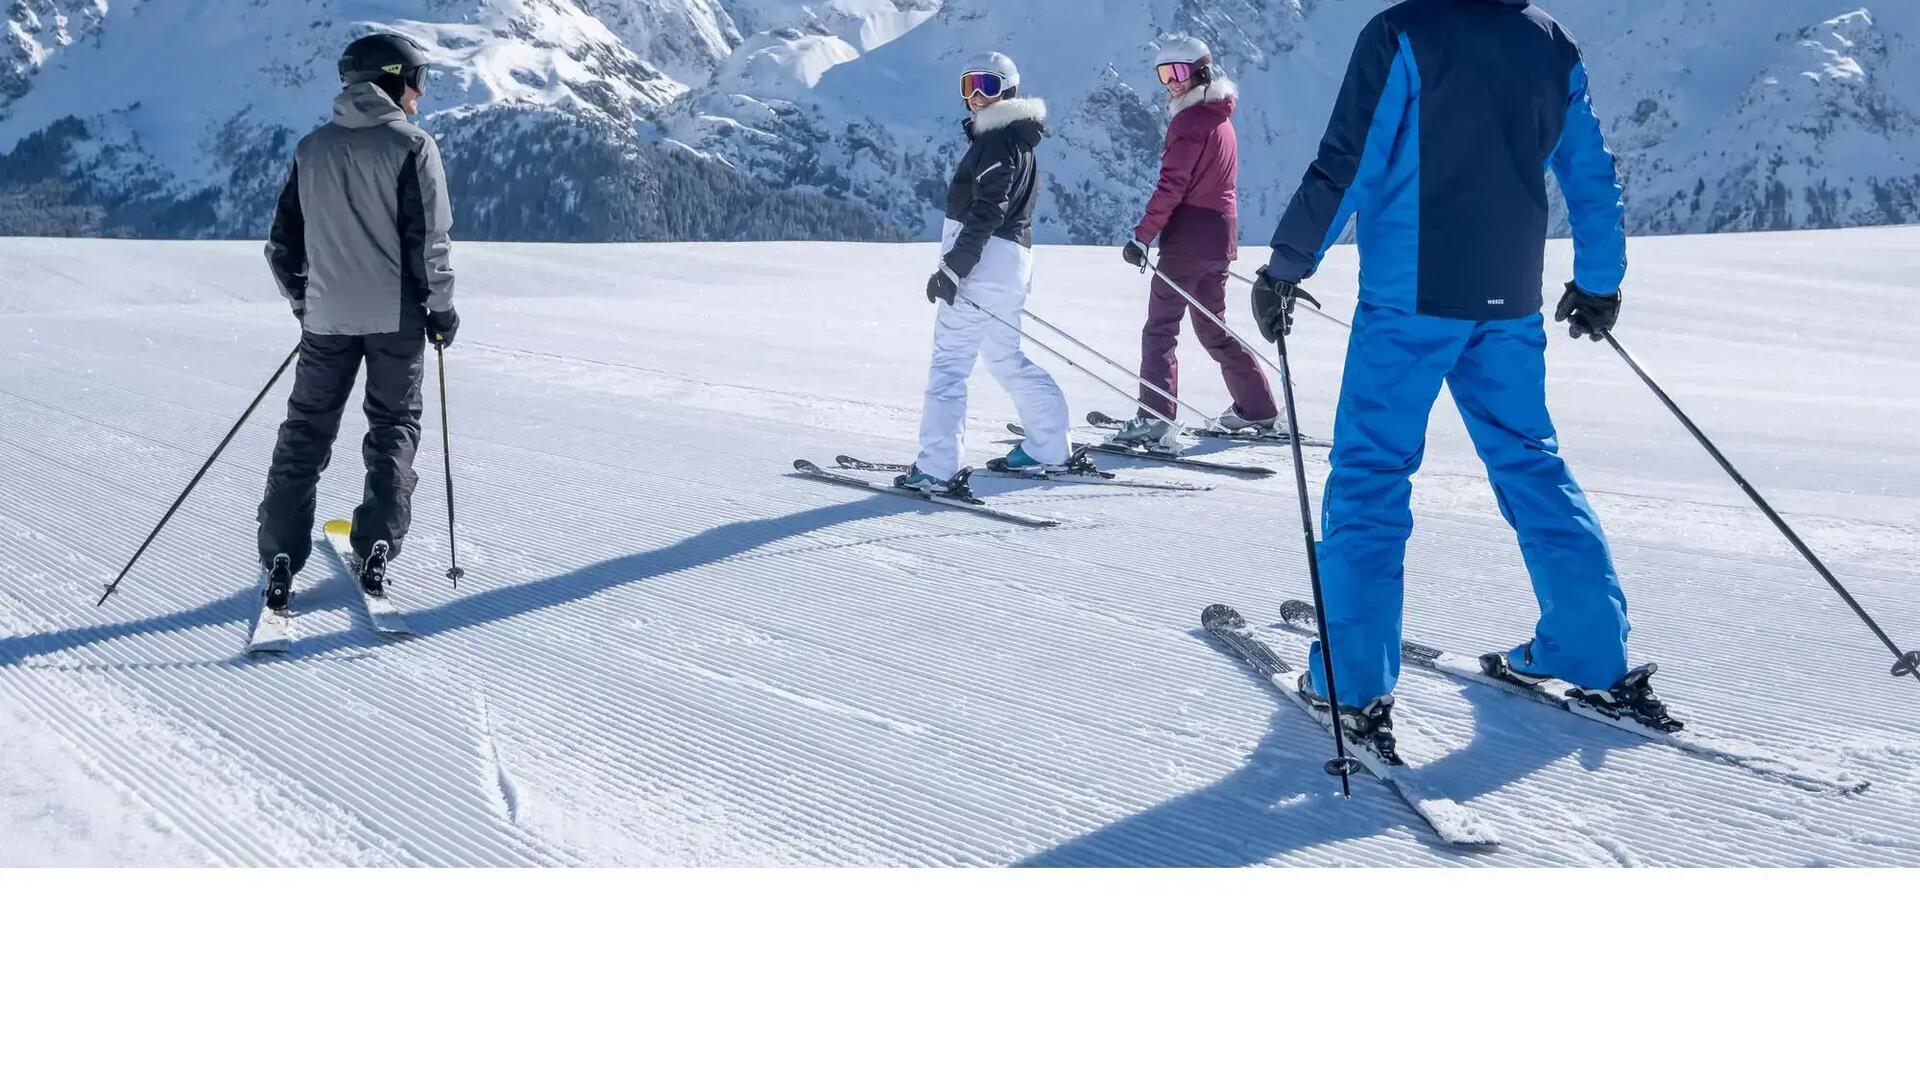 A group of adult skiers on their Wedze skis on a fresh ski slope